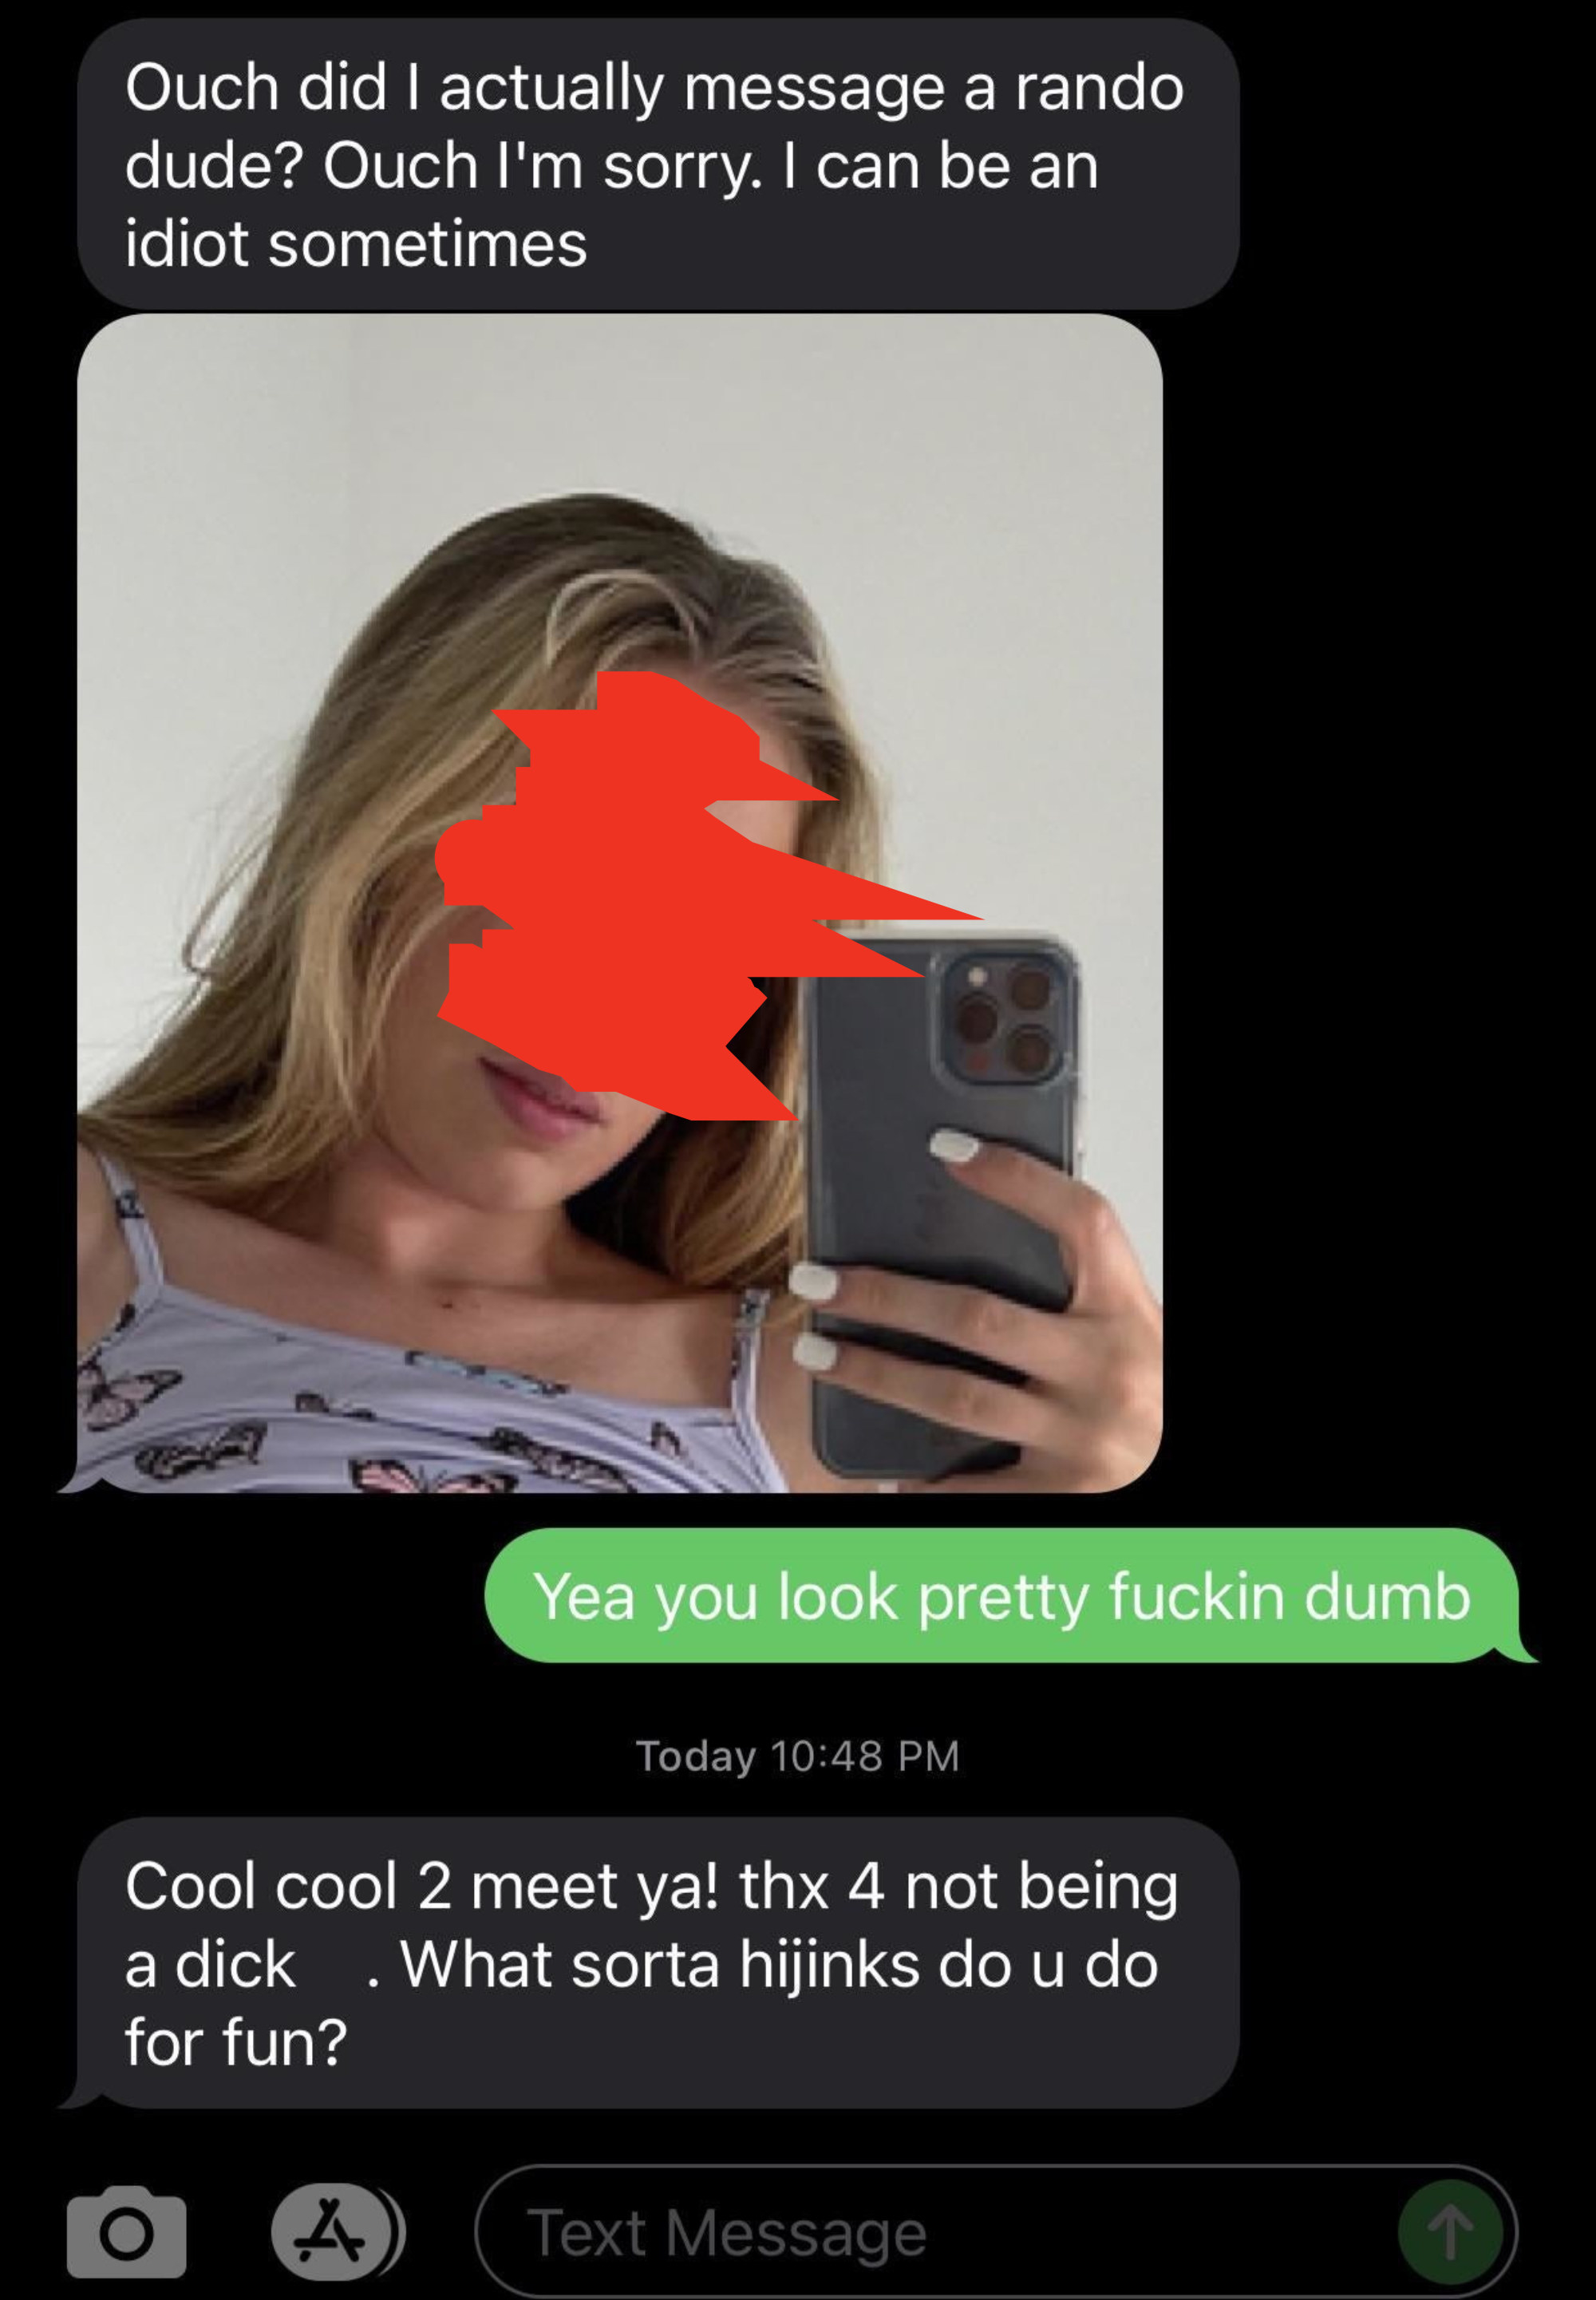 scammer sendiing a picture and ignoring the response